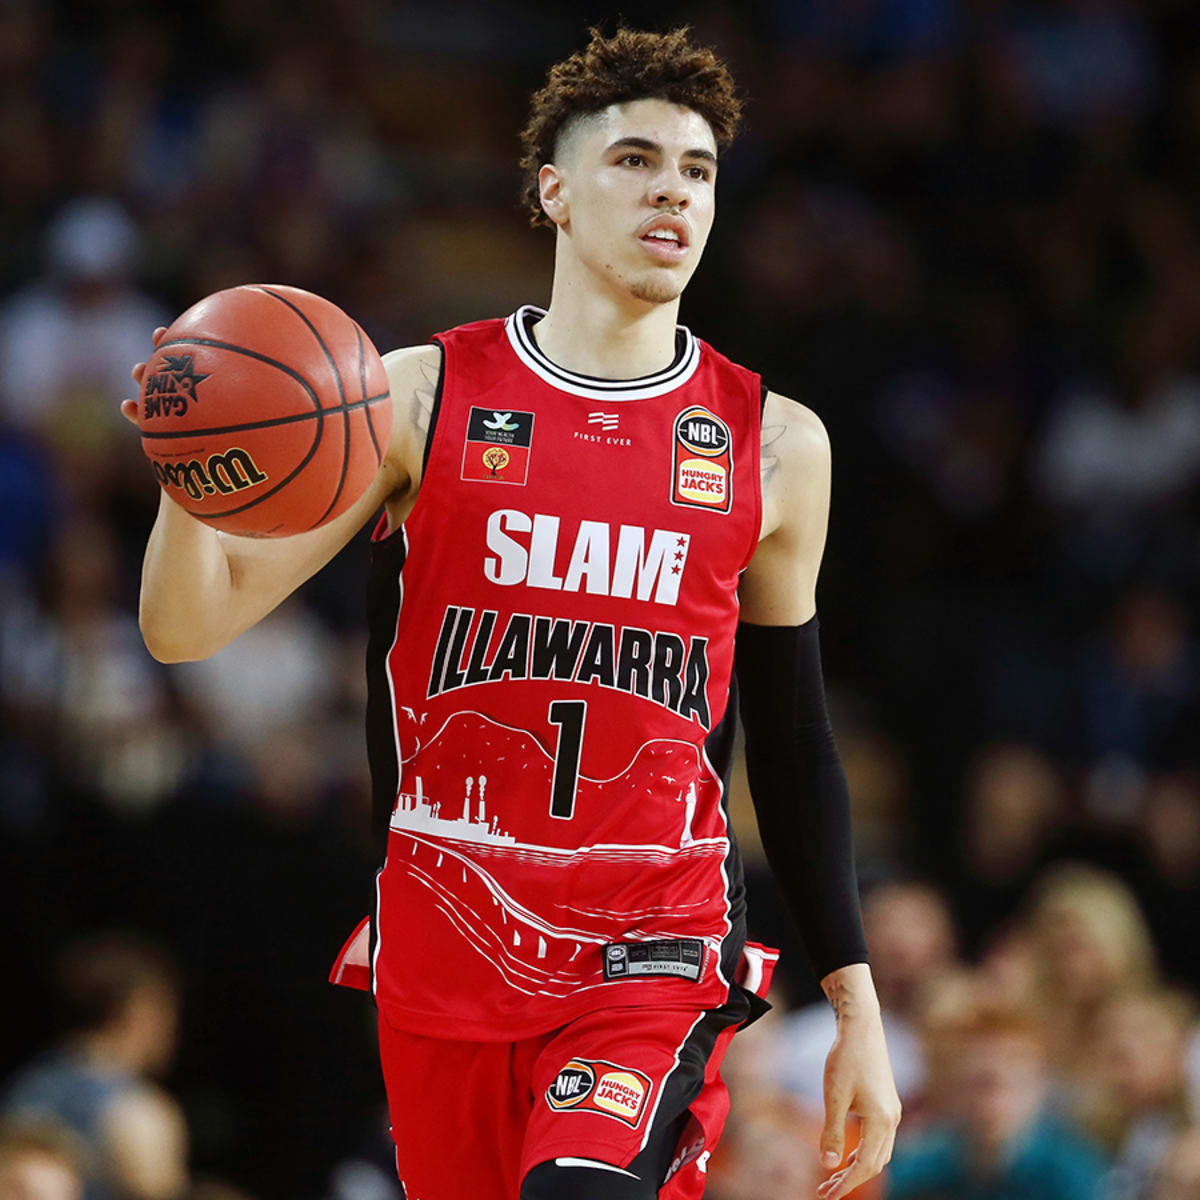 The Warriors should avoid drafting LaMelo Ball in the 2020 NBA Draft